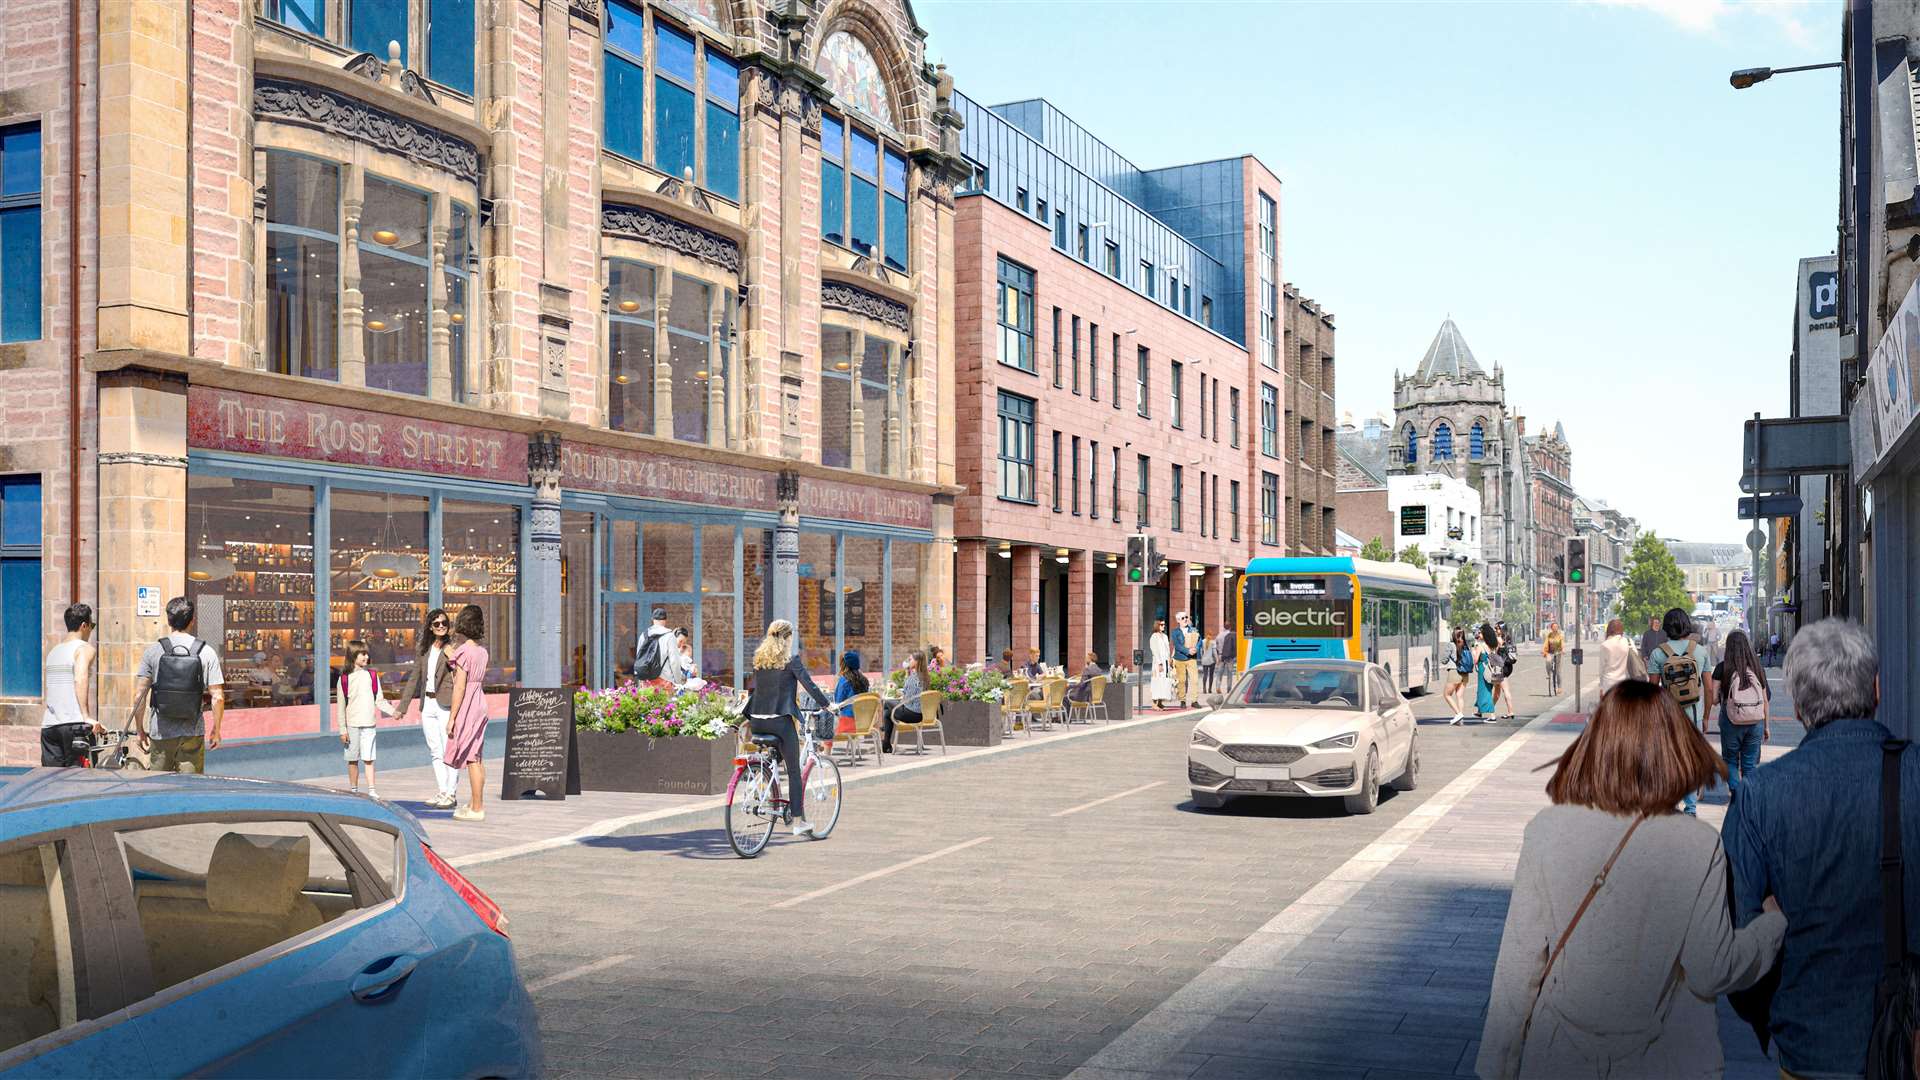 Plans to improve Academy Street have faced criticism from businesses and others.